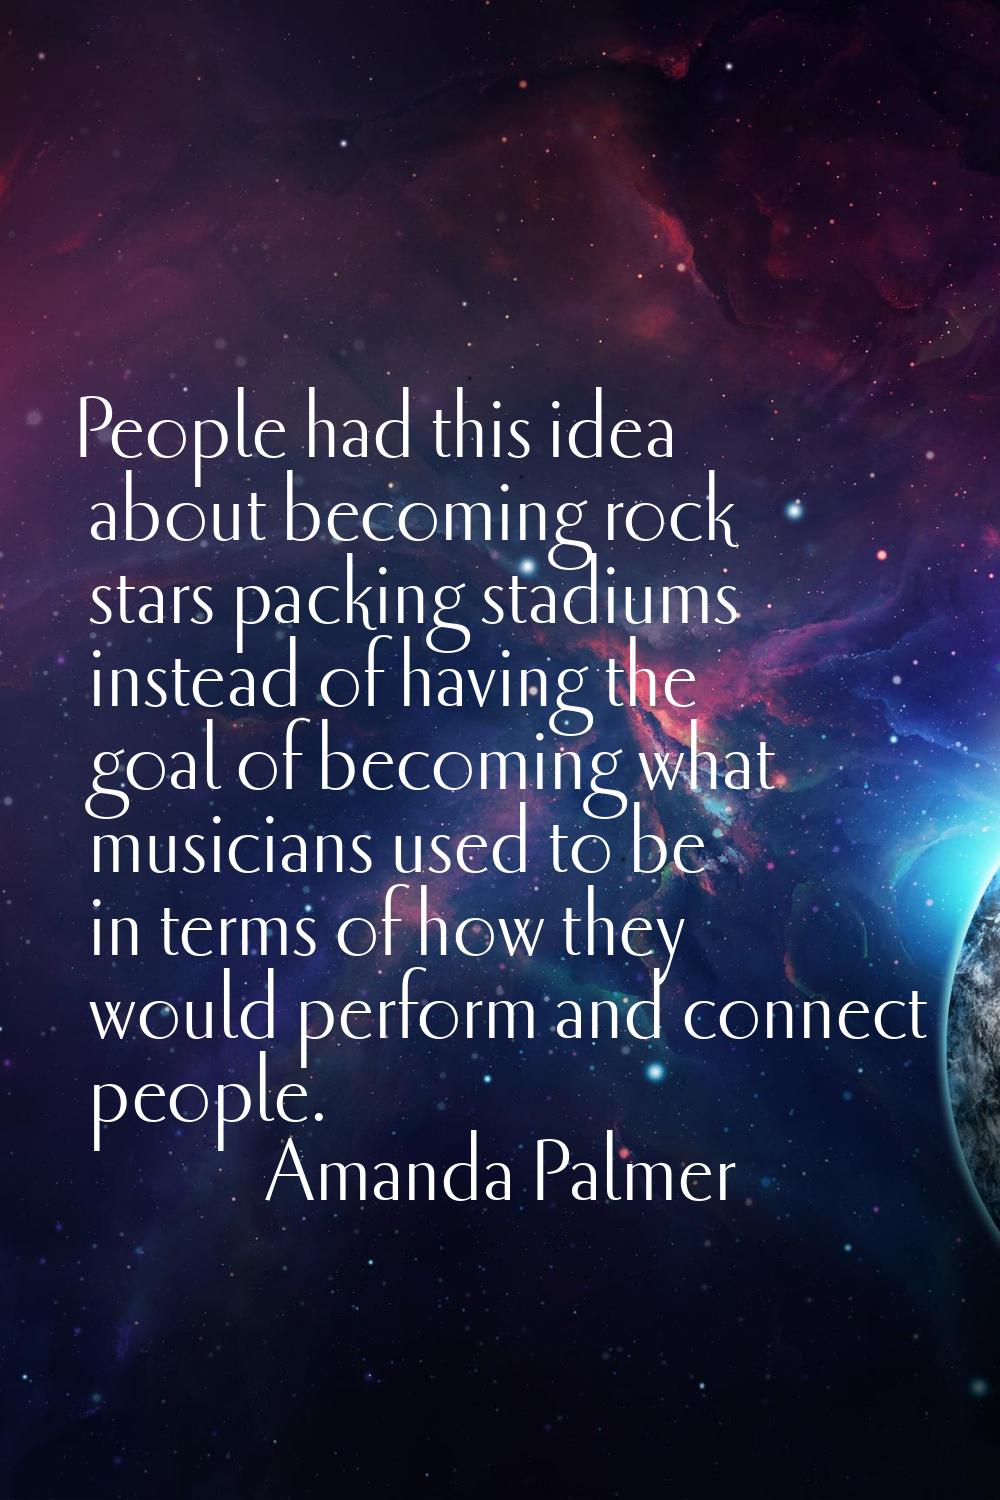 People had this idea about becoming rock stars packing stadiums instead of having the goal of becom